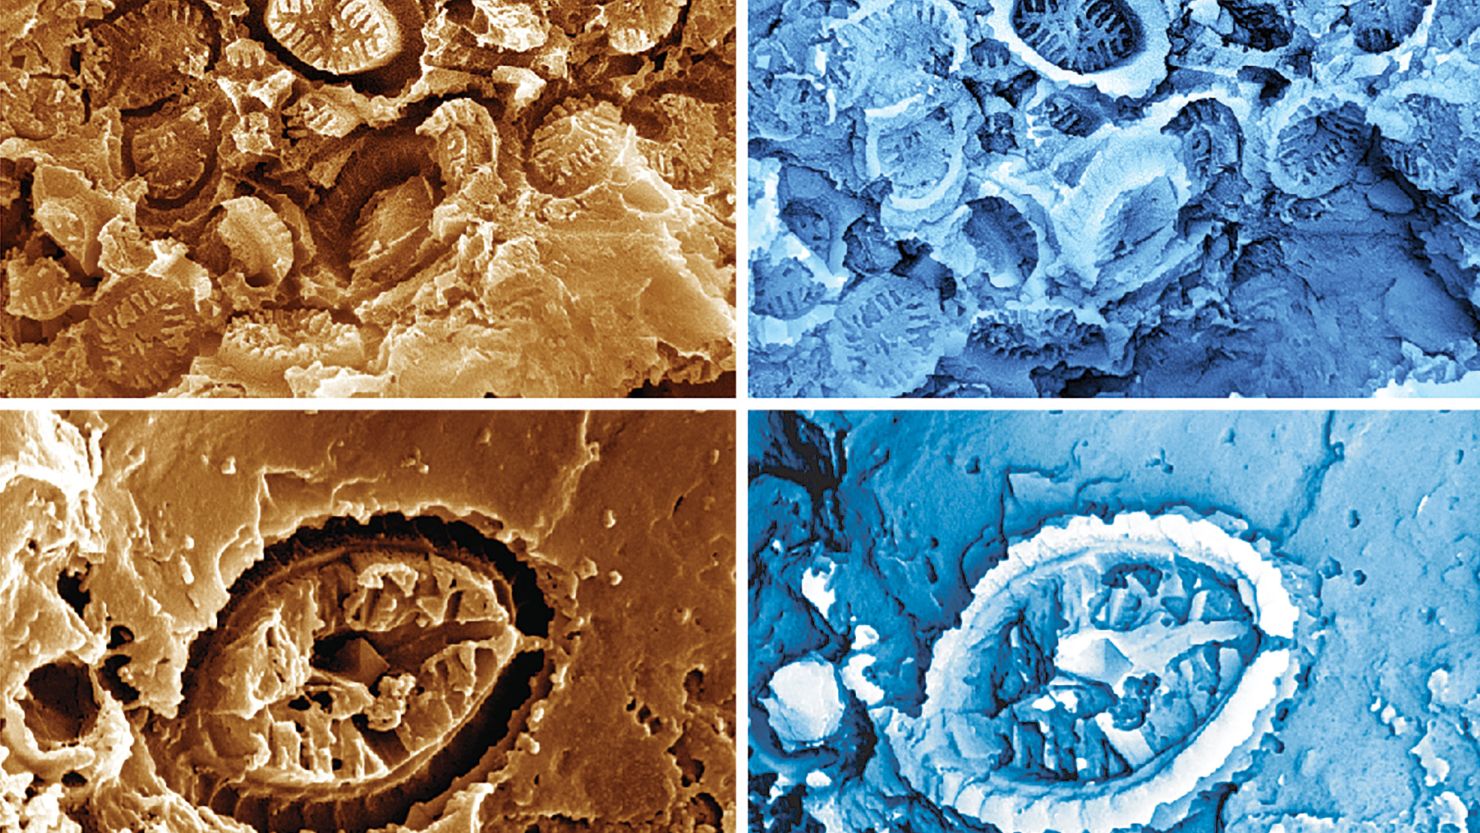 A microscopic view of ghost nannofossils (left) can be seen along with their virtual casts (right). The fossils are 15 times narrower than the width of a human hair. 